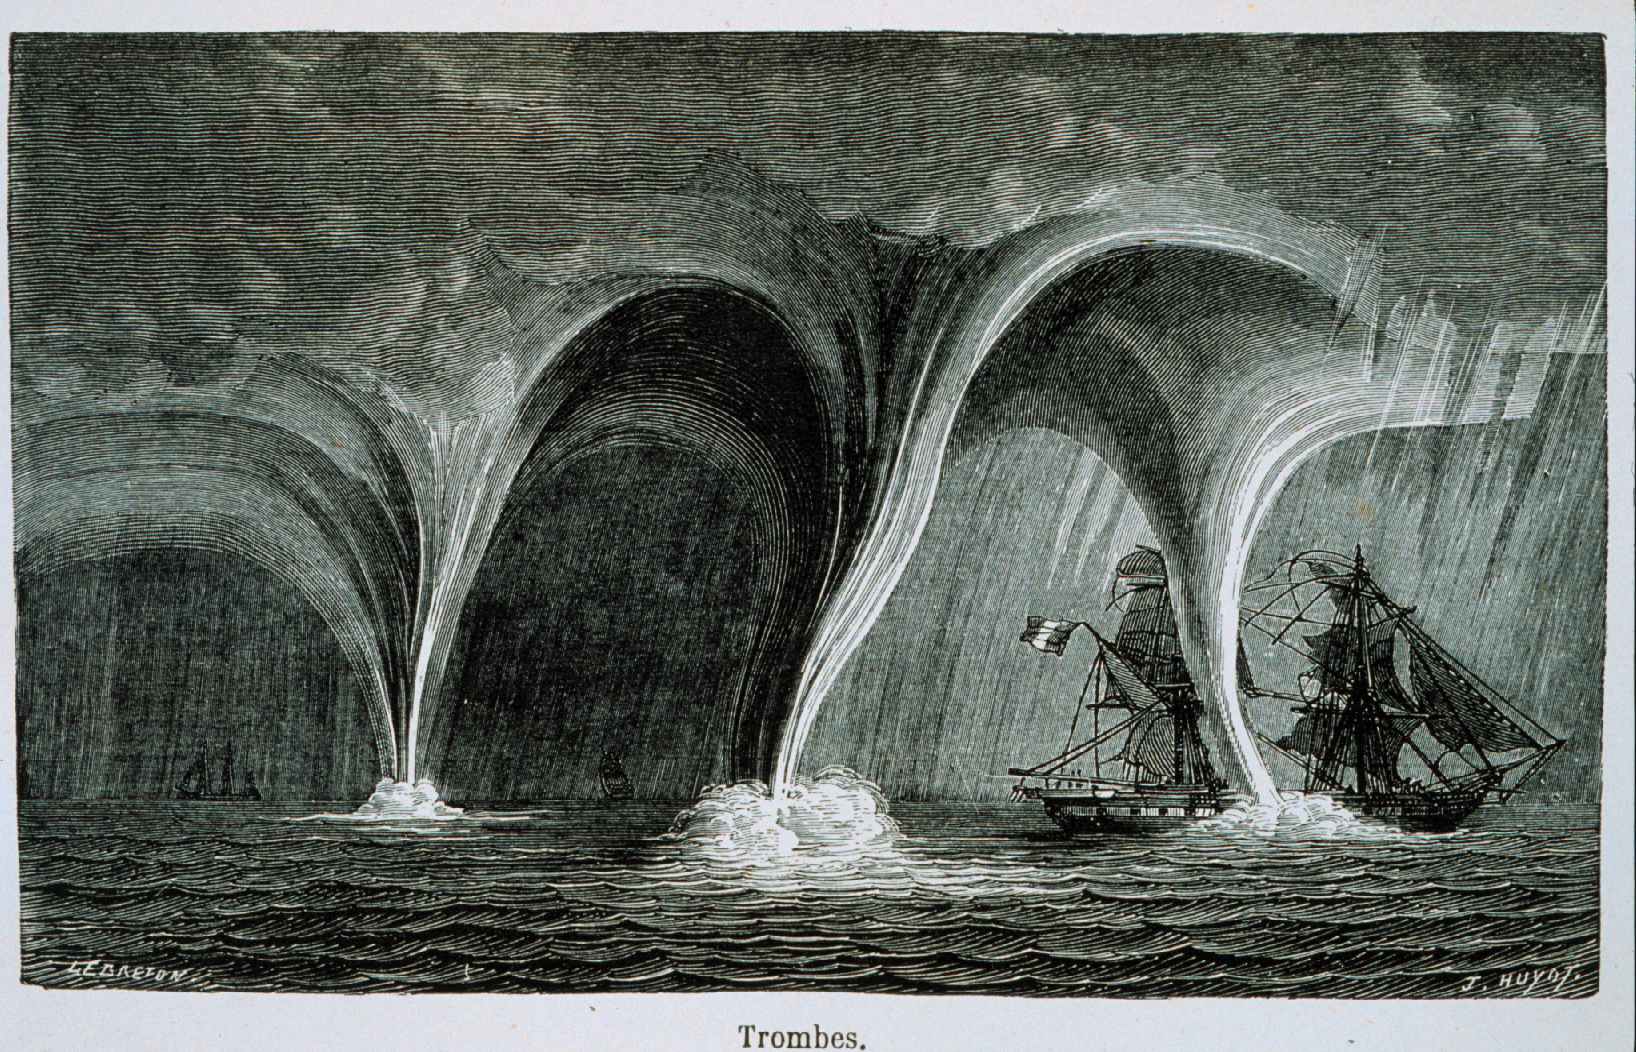 "Trombes" A sailing vessel in peril from multiple waterspouts In: "Les Meteores", Margolle et Zurcher, 3rd Edition, 1869 Page 126. Wikimedia Commons the Grand Harbour of Malta Tornado